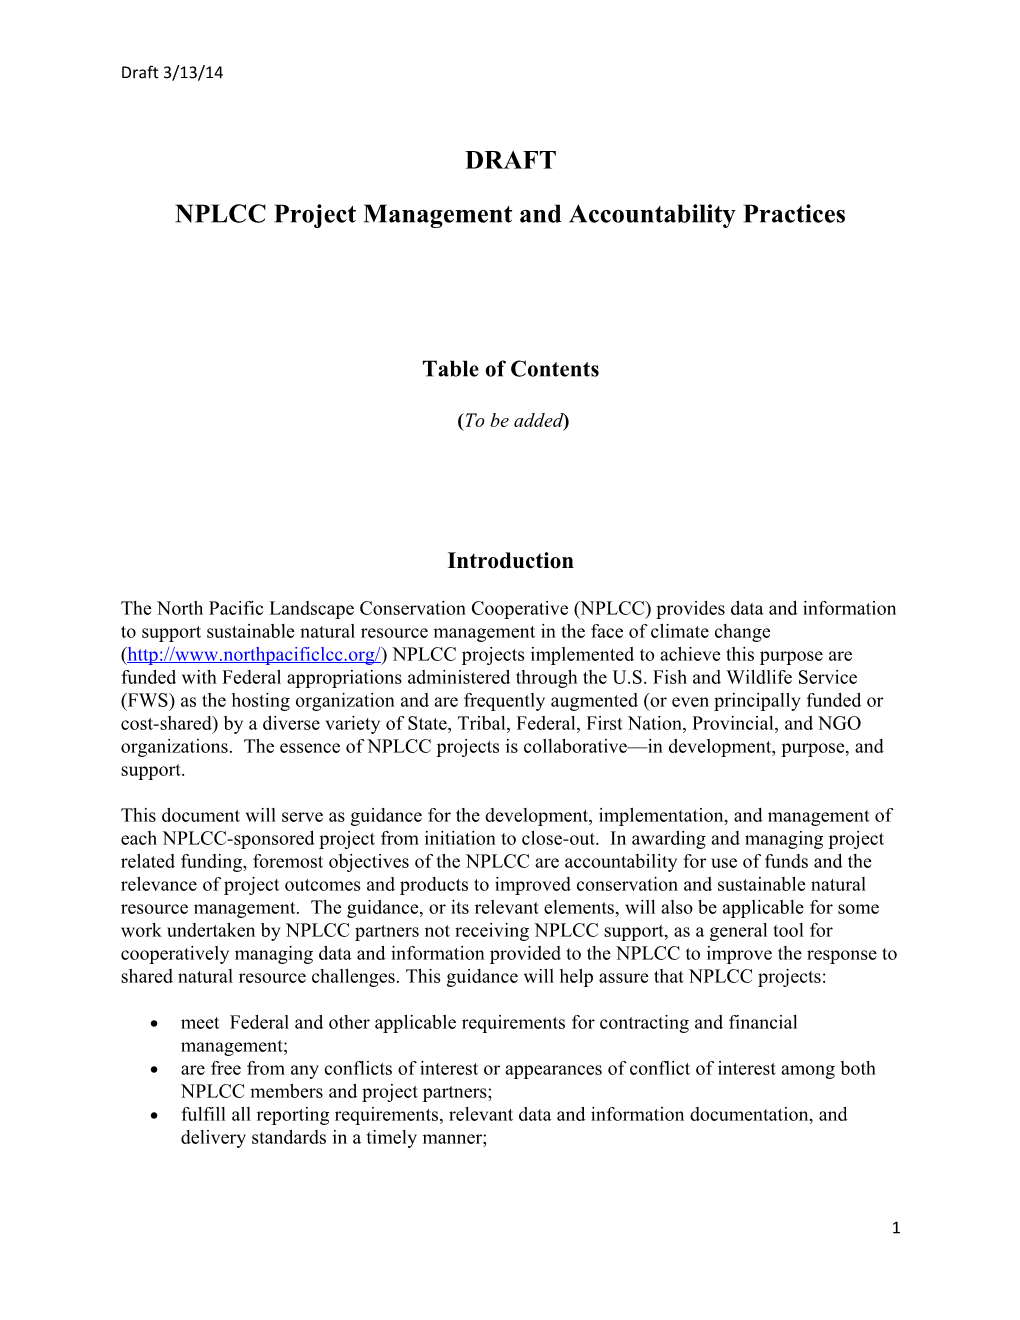 NPLCC Project Management and Accountability Practices